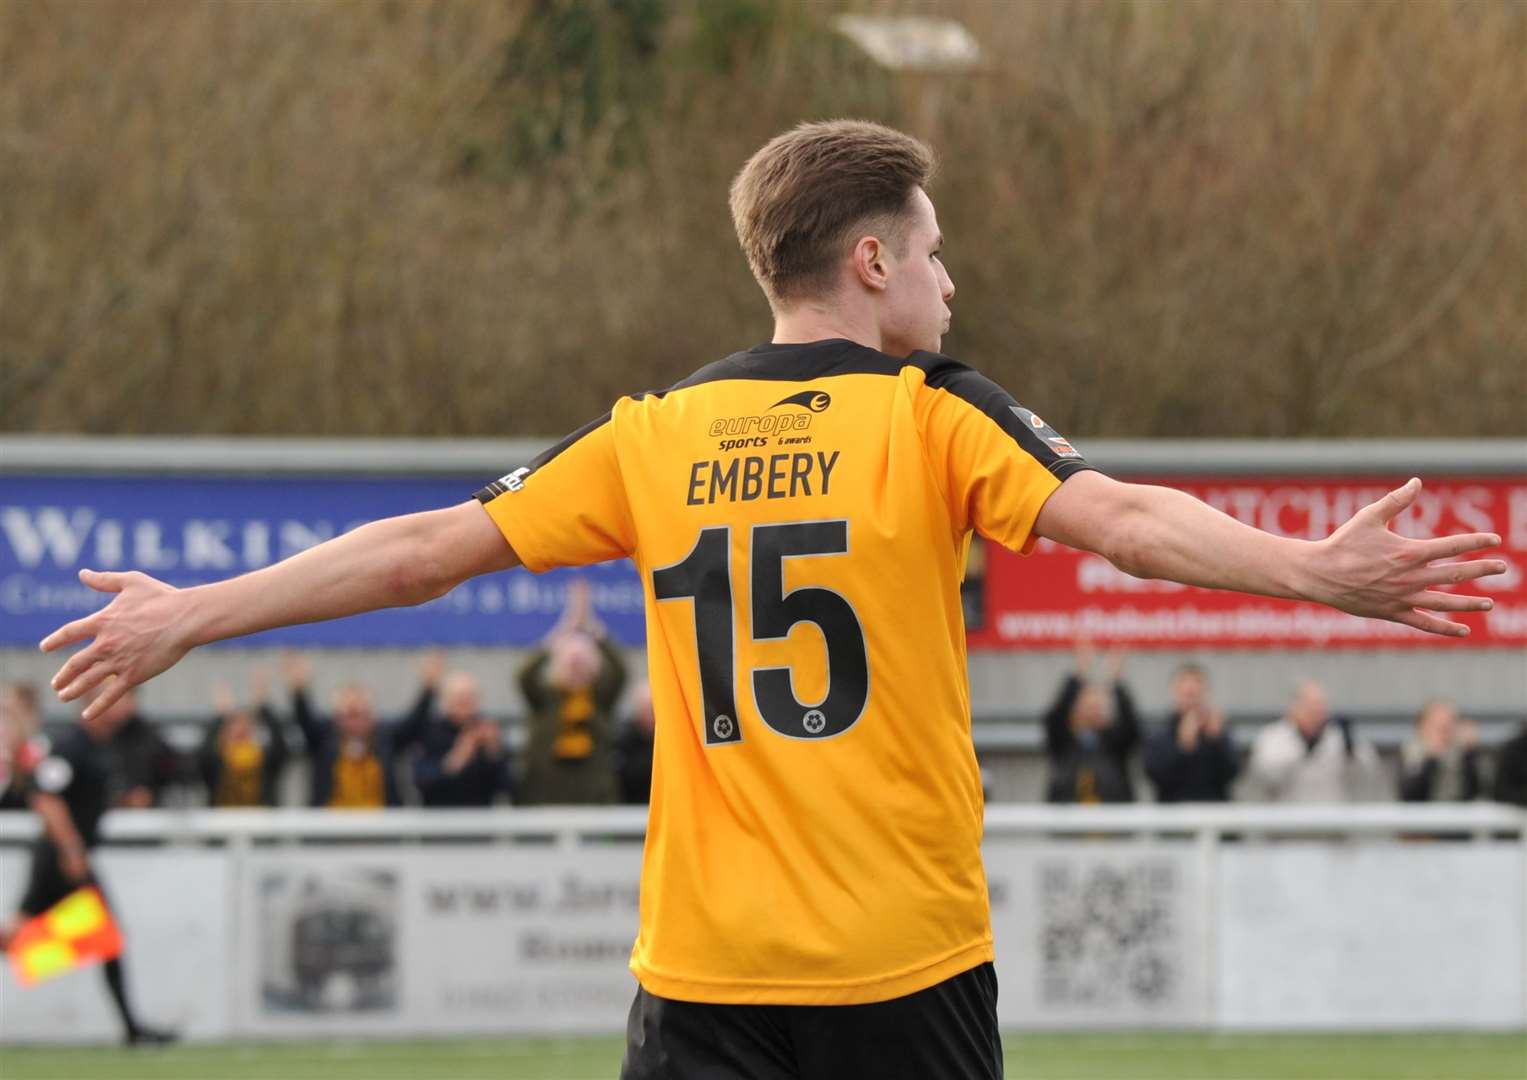 Jake Embery scored on his first start for Maidstone after joining from Herne Bay last season Picture: Steve Terrell